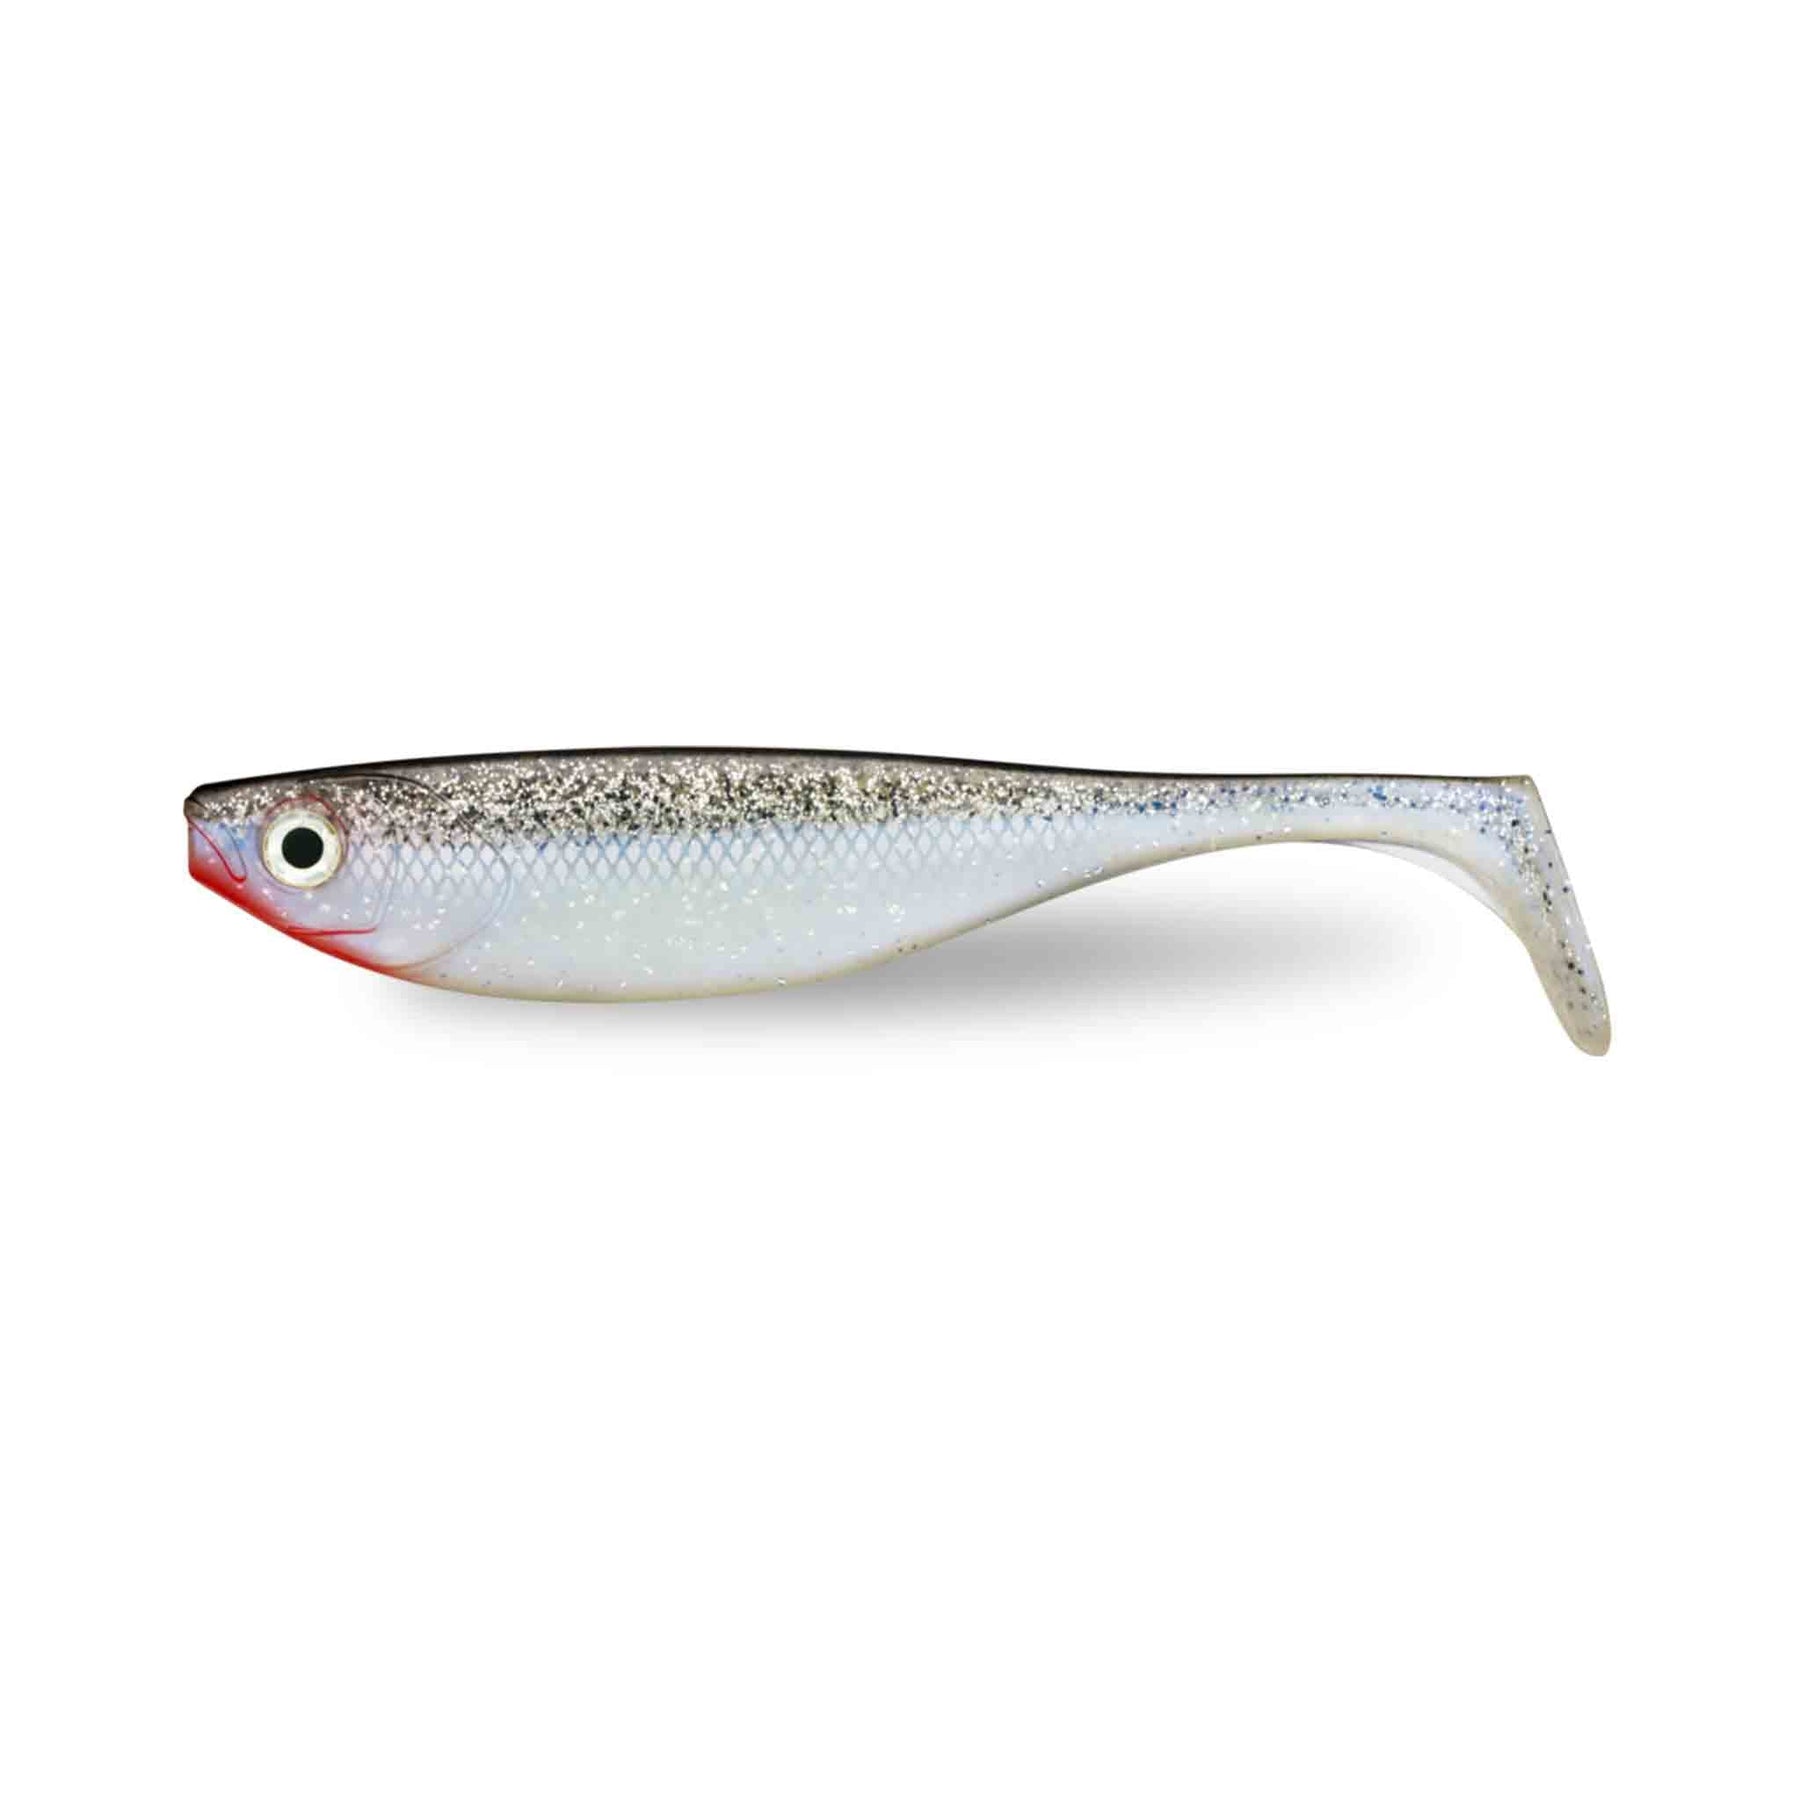 View of Swimbaits Storm Boom Shad 7'' Swimbait Roach available at EZOKO Pike and Musky Shop